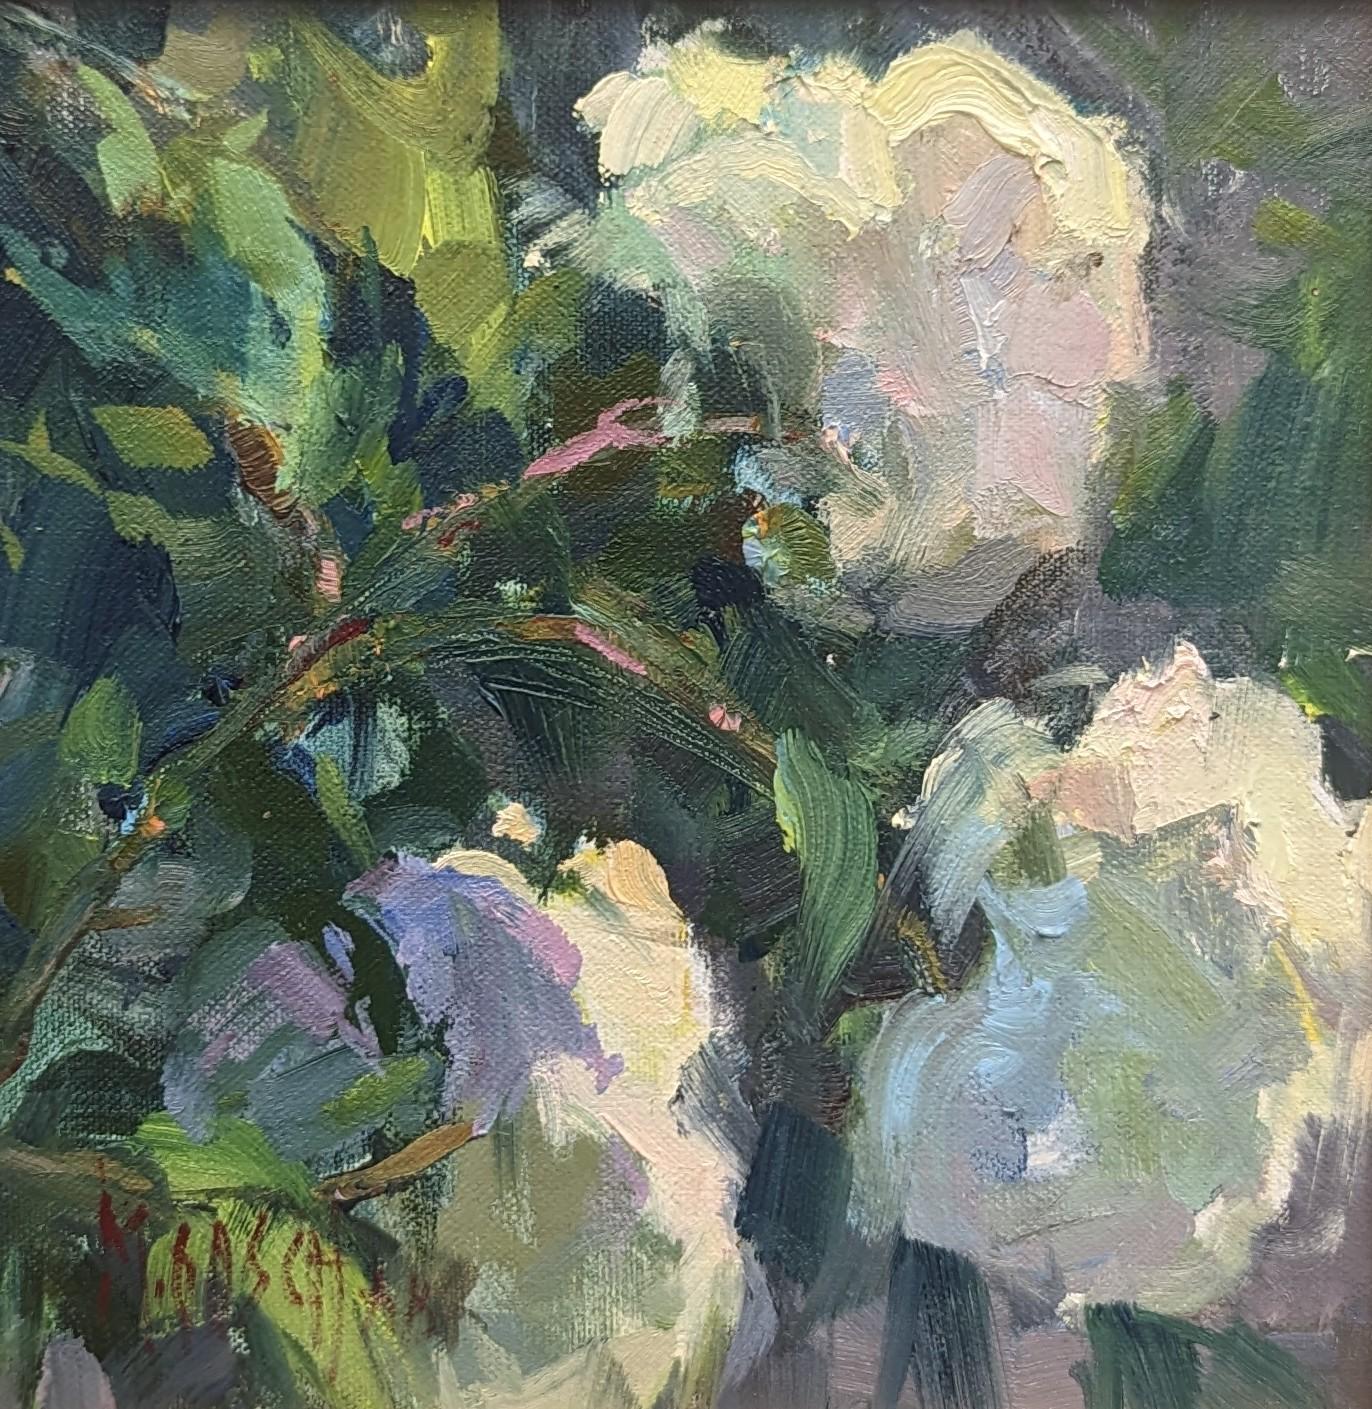 Unframed this piece is 8 x 8

Millie Gosch is an avid plein air painter who paints studies from real life and from these studies she creates her beautiful landscape pieces. An experienced artist, she has worked for over 25 years as a professional